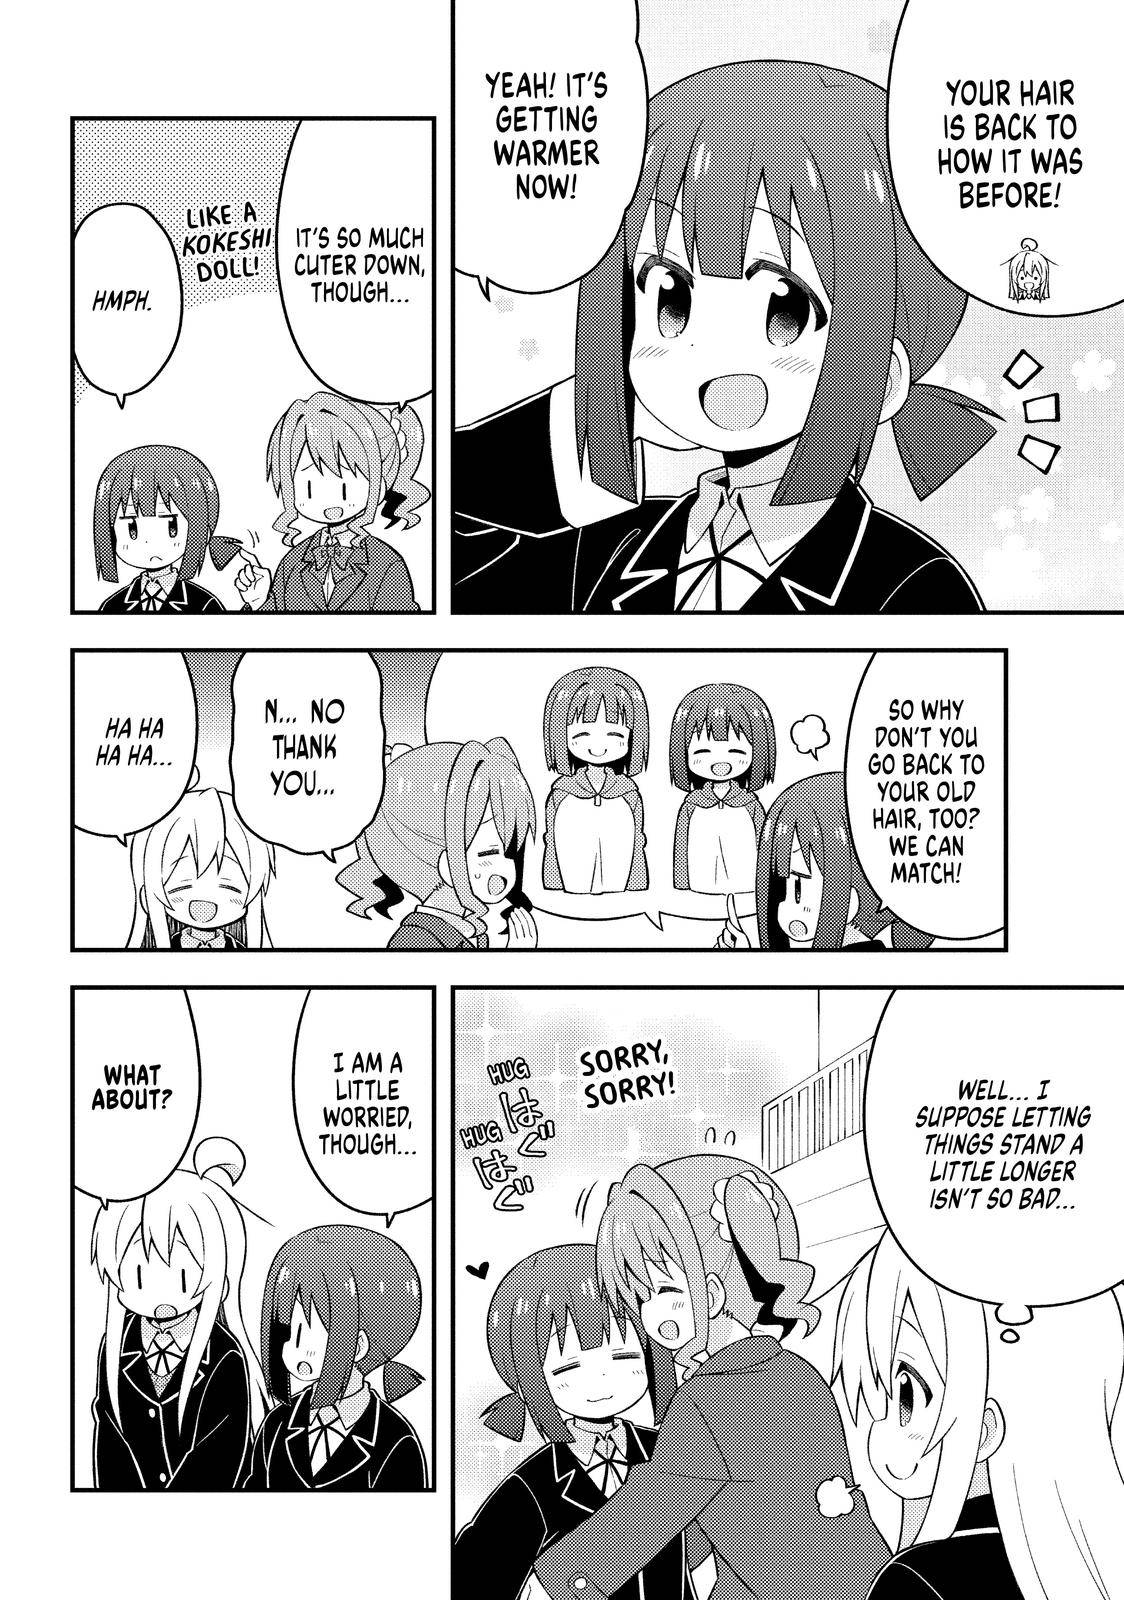 ONIMAI - I'm Now Your Sister! - chapter 39 - #4